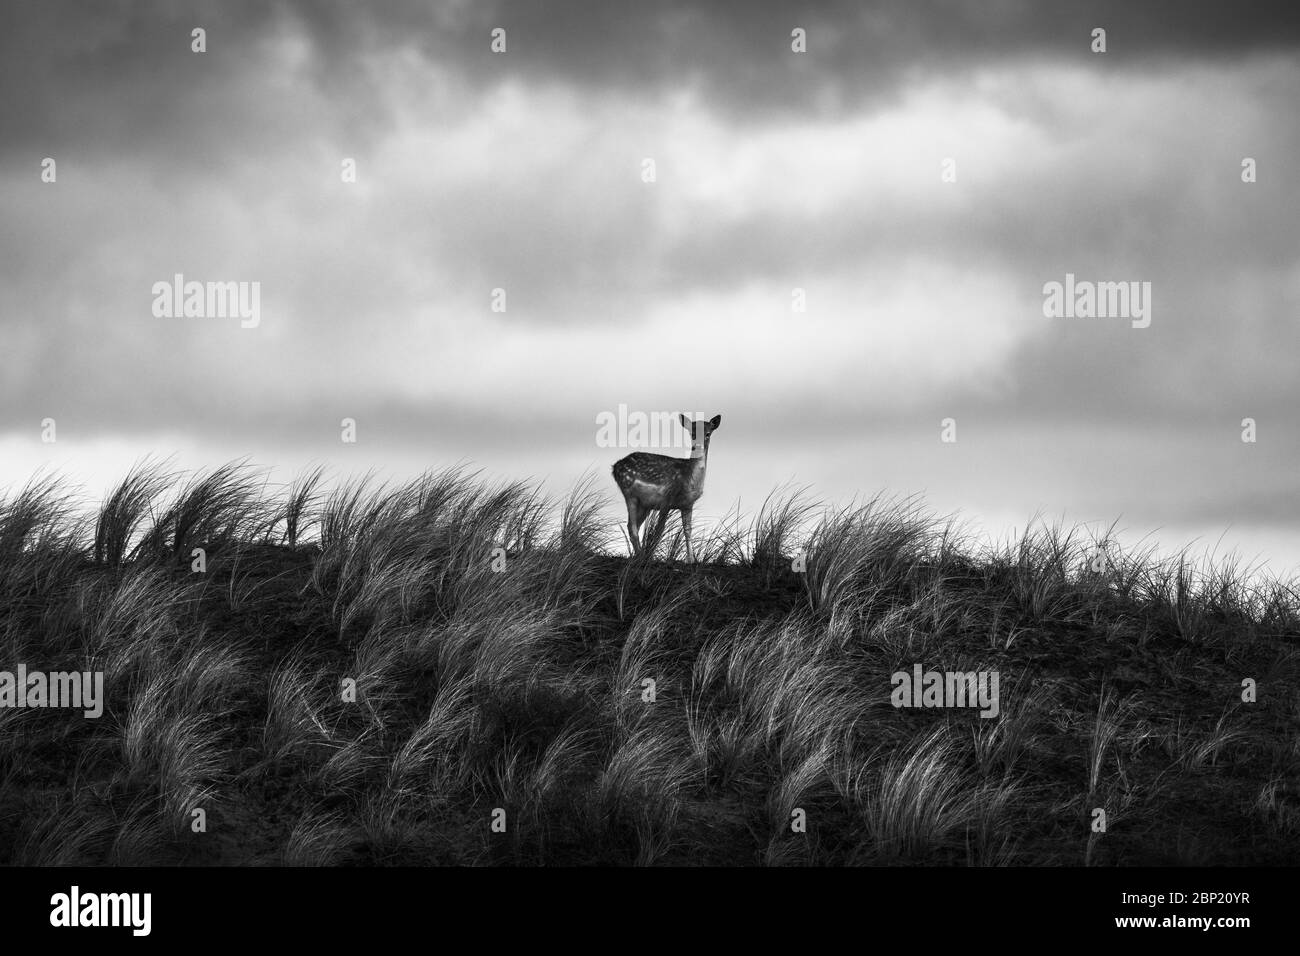 Zandvoort, Holland, Amsterdam Coast, a silhouette portrait against stormy sky of a European Fallow Deer doe on a grassy hill side Stock Photo